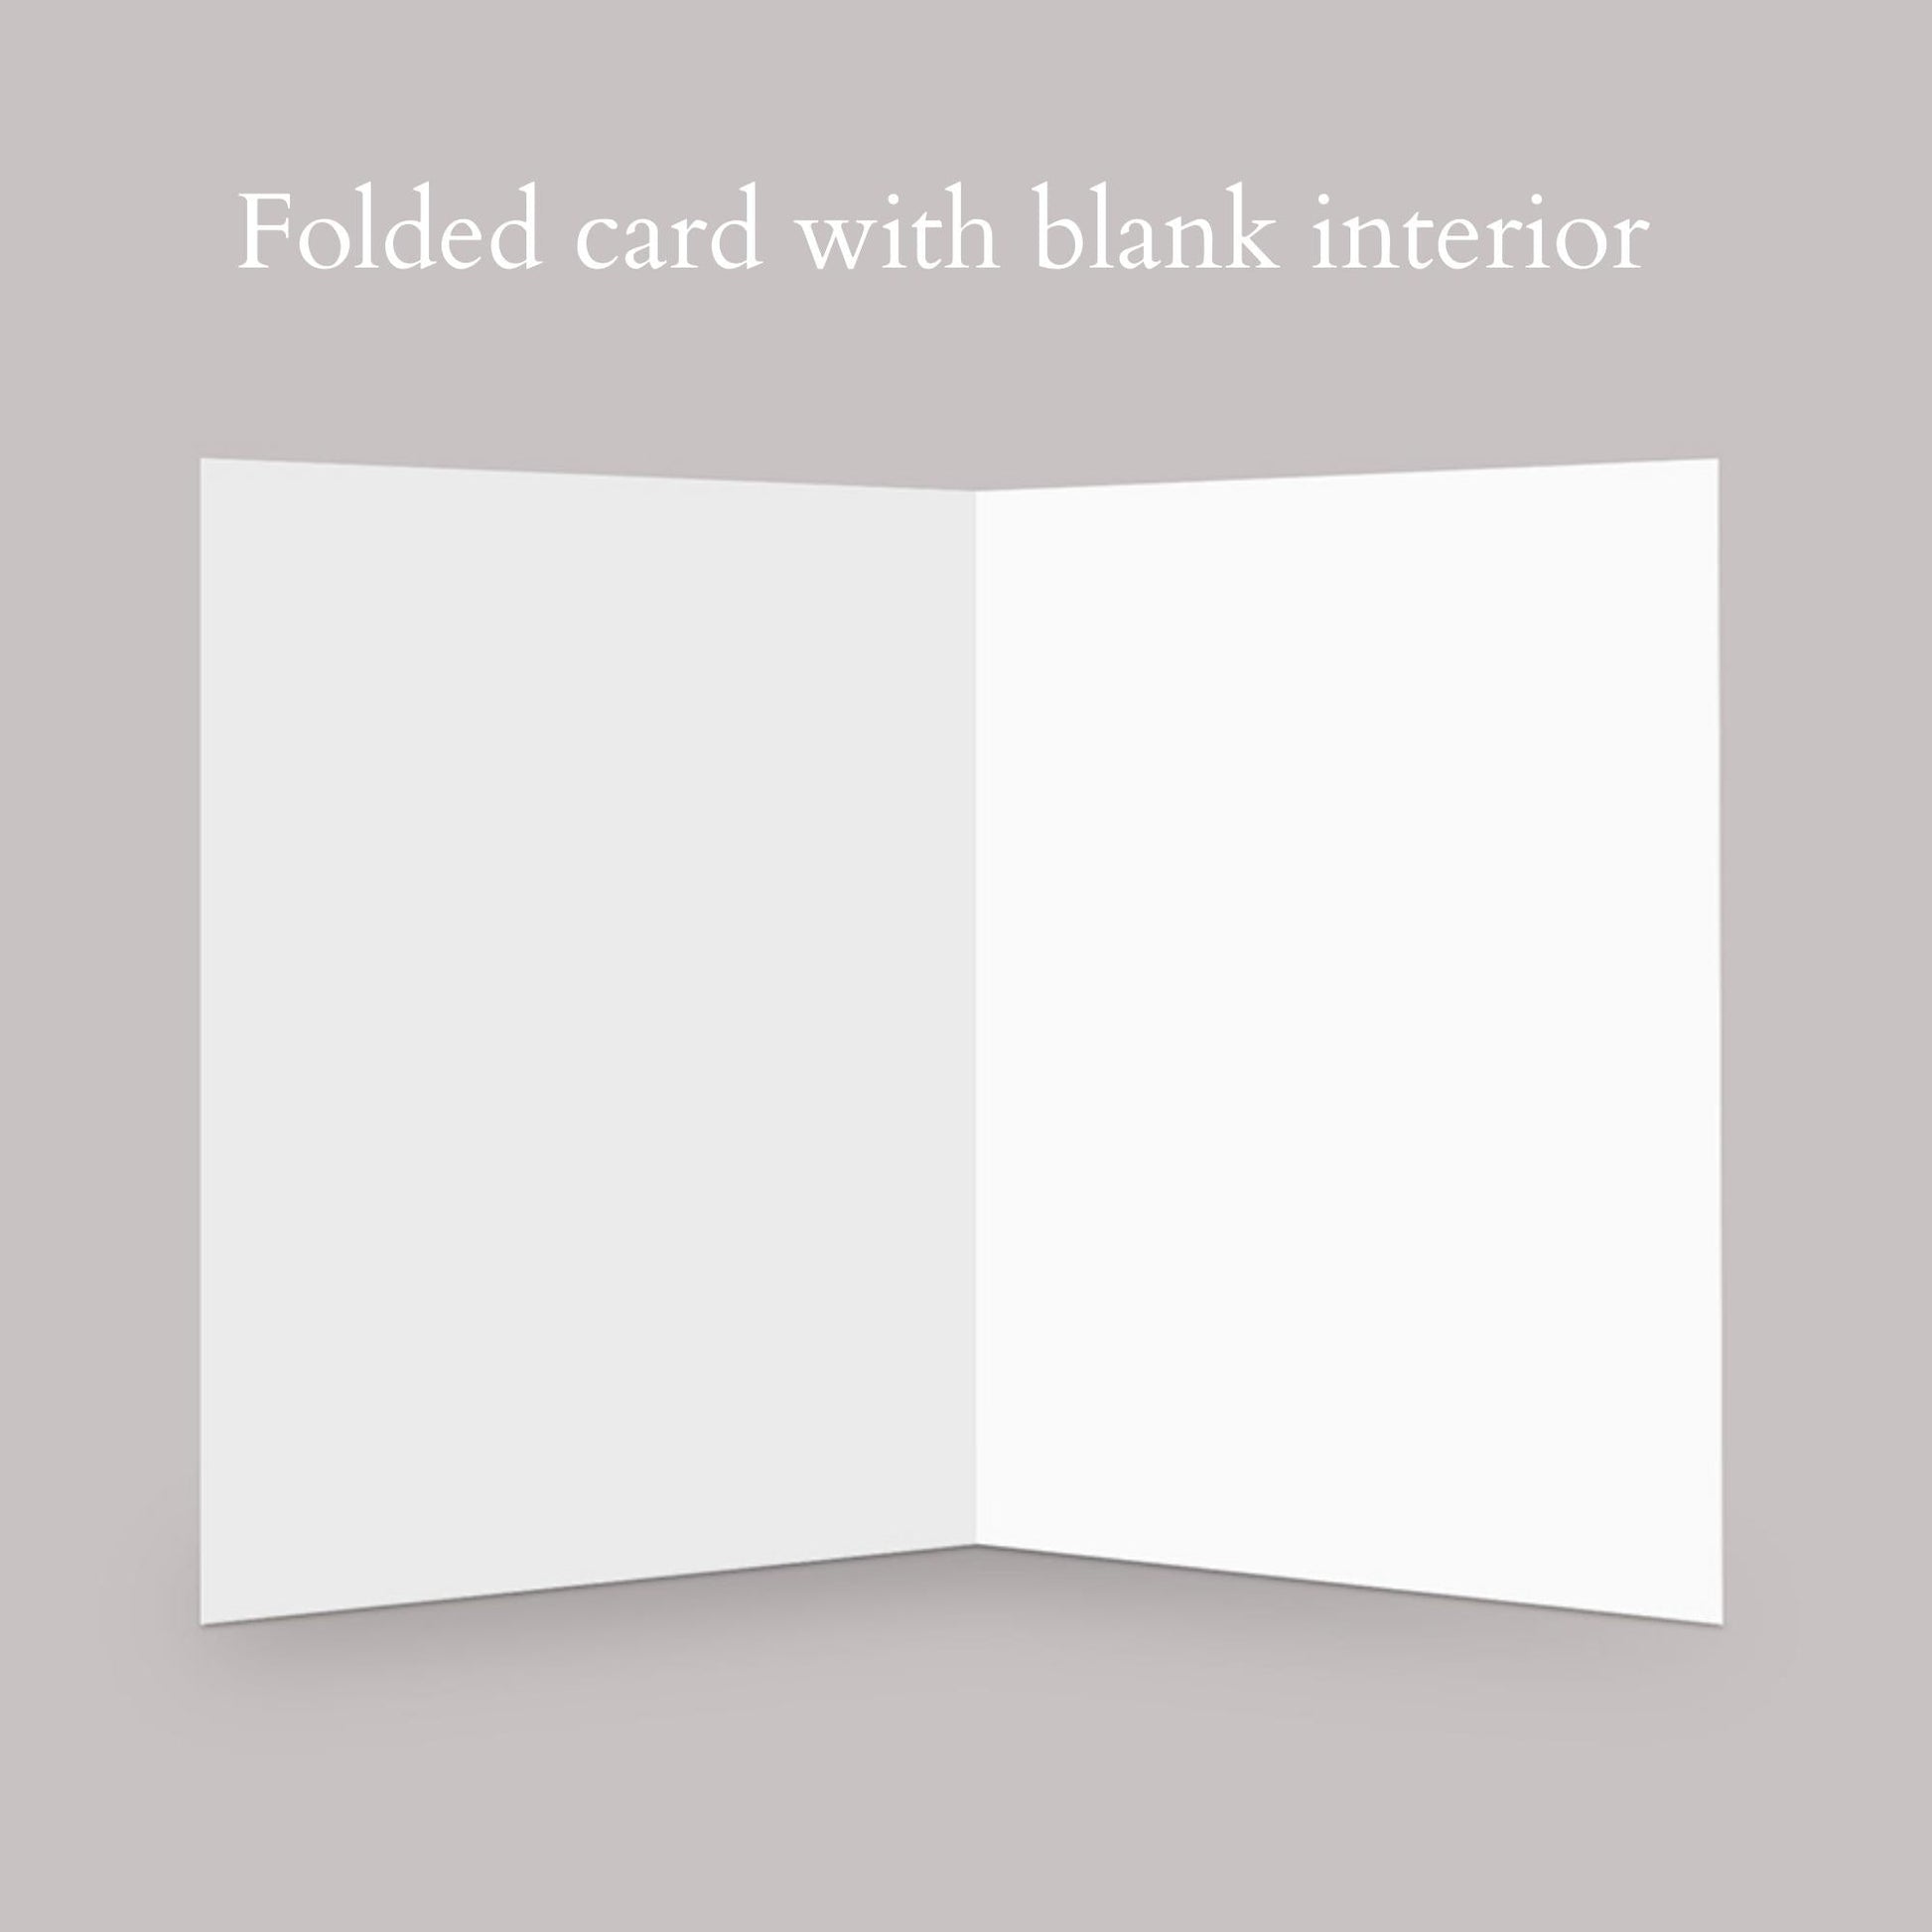 hand illustrated greeting card with blank interior